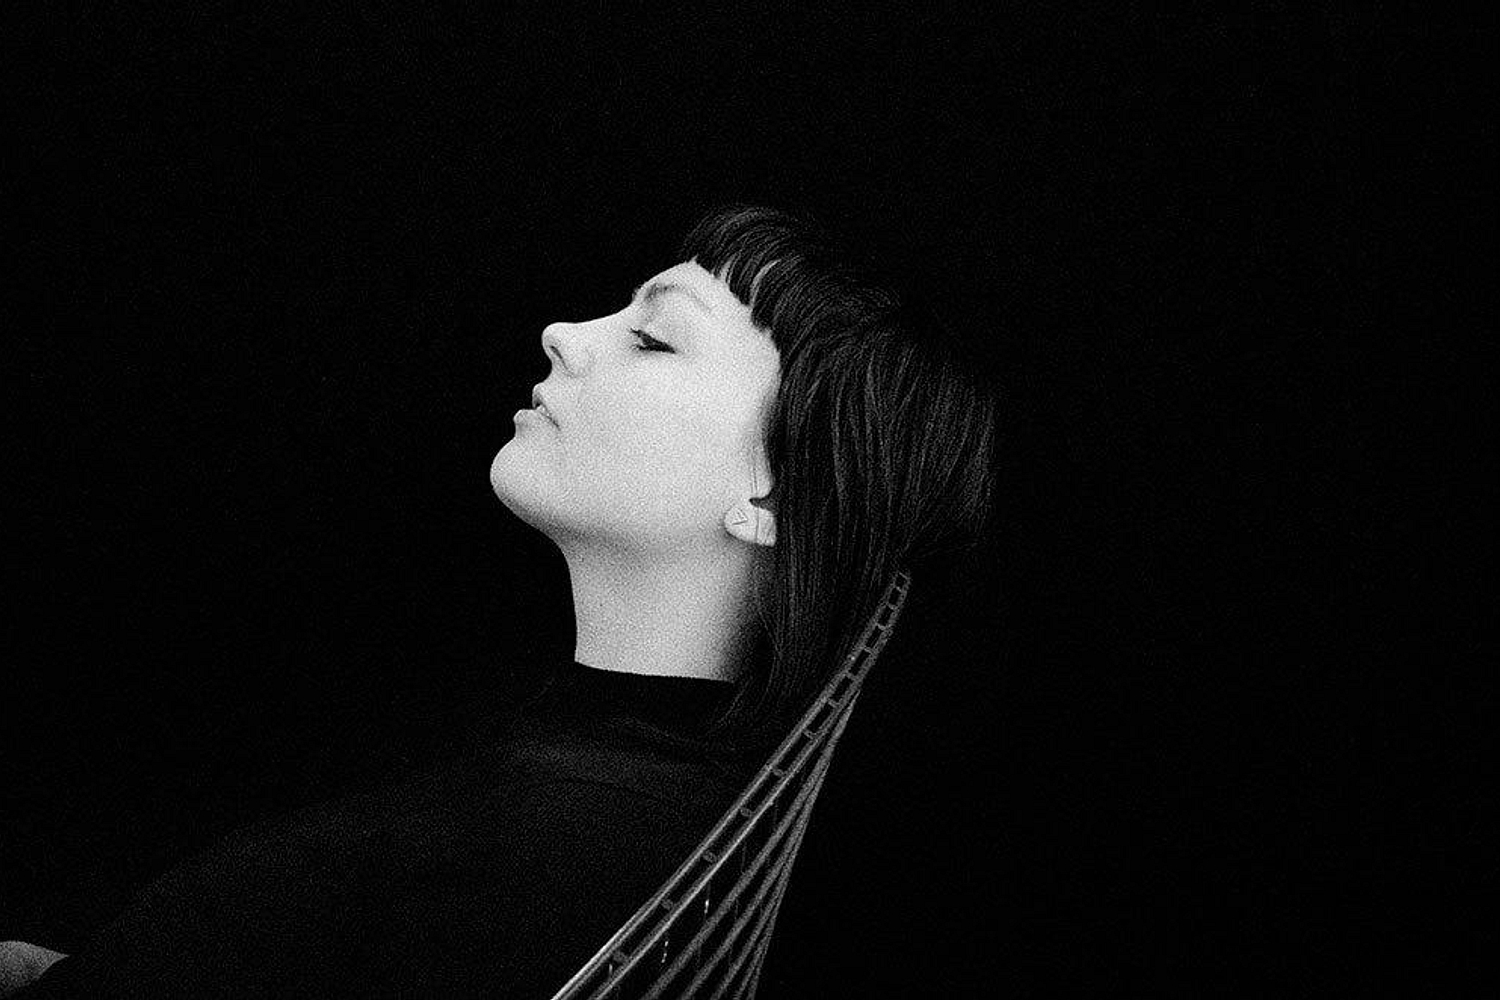 Angel Olsen delves into the past on ‘Who’s Sorry Now’